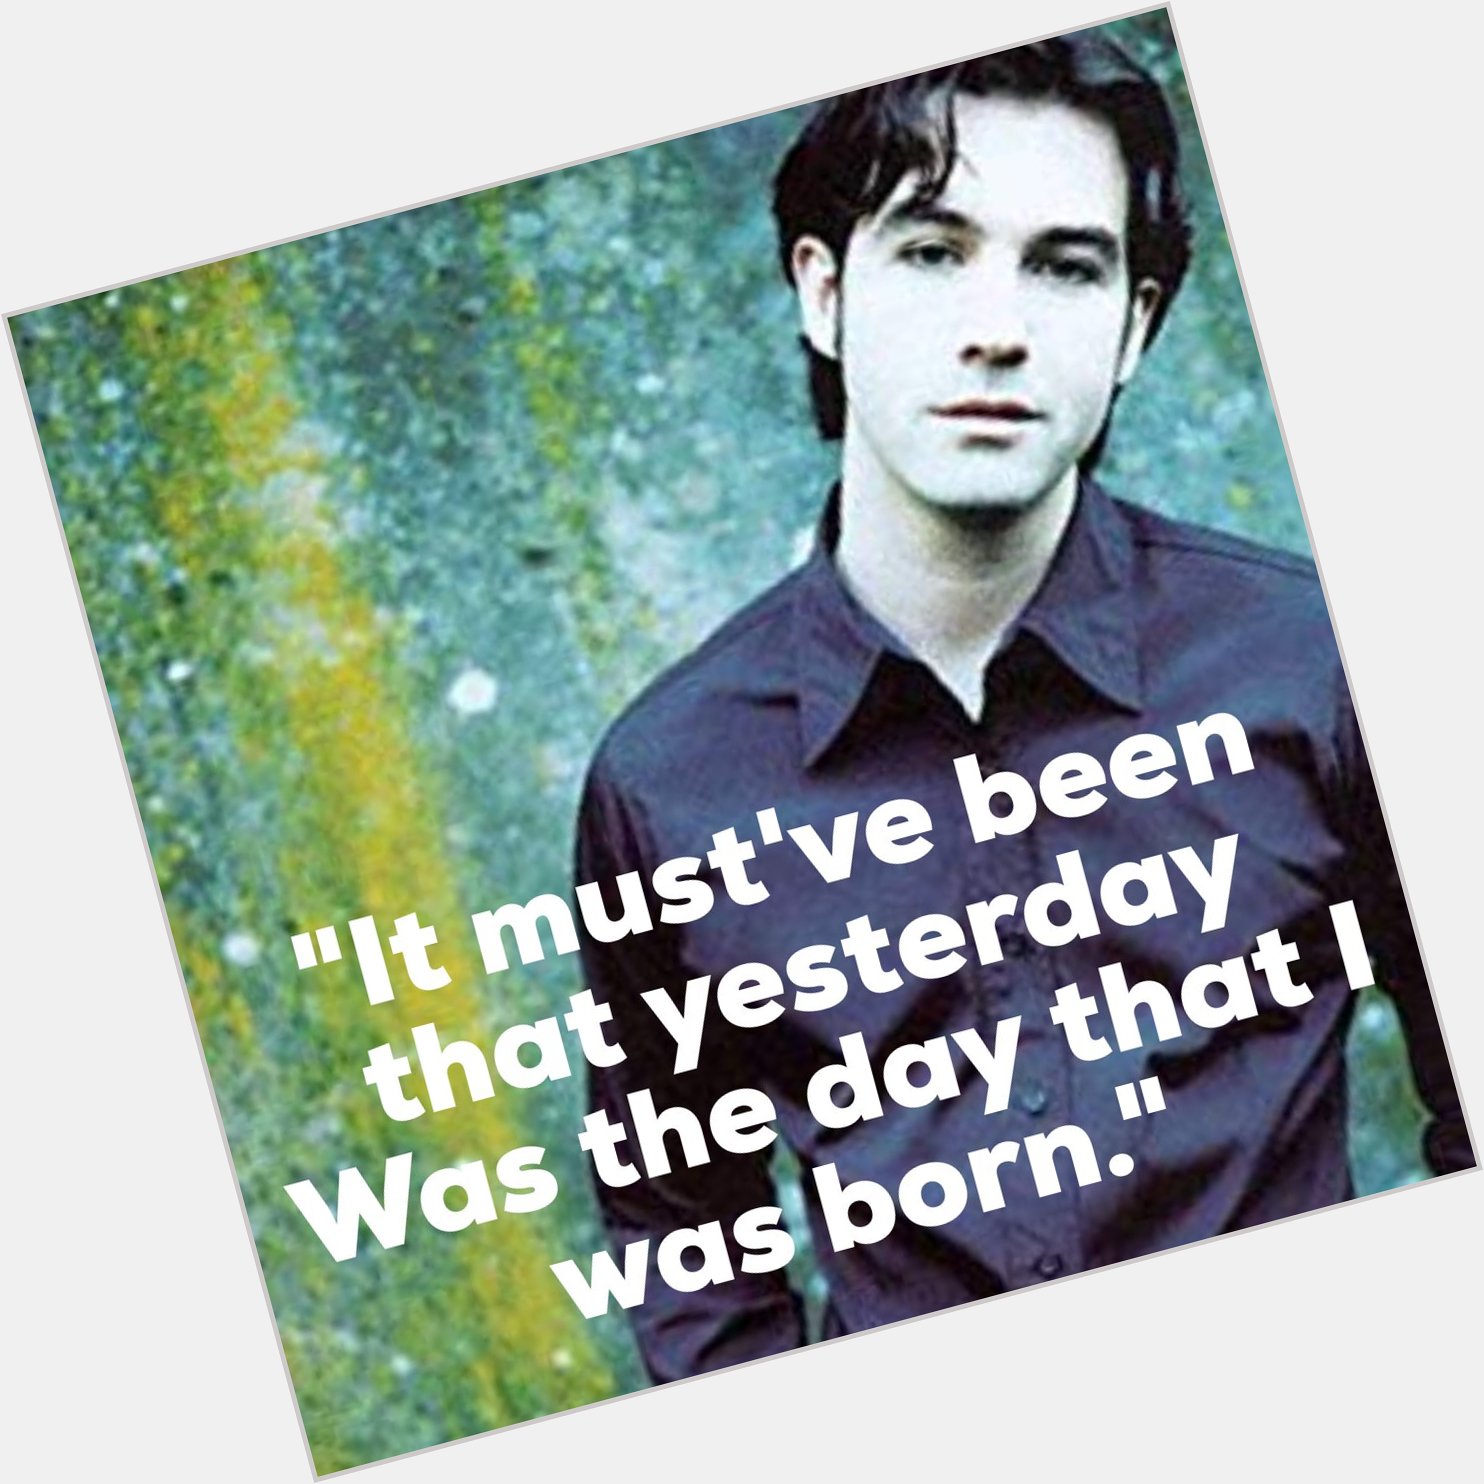 Seeing how yesterday was birthday, Happy Duncan Sheik Day!   